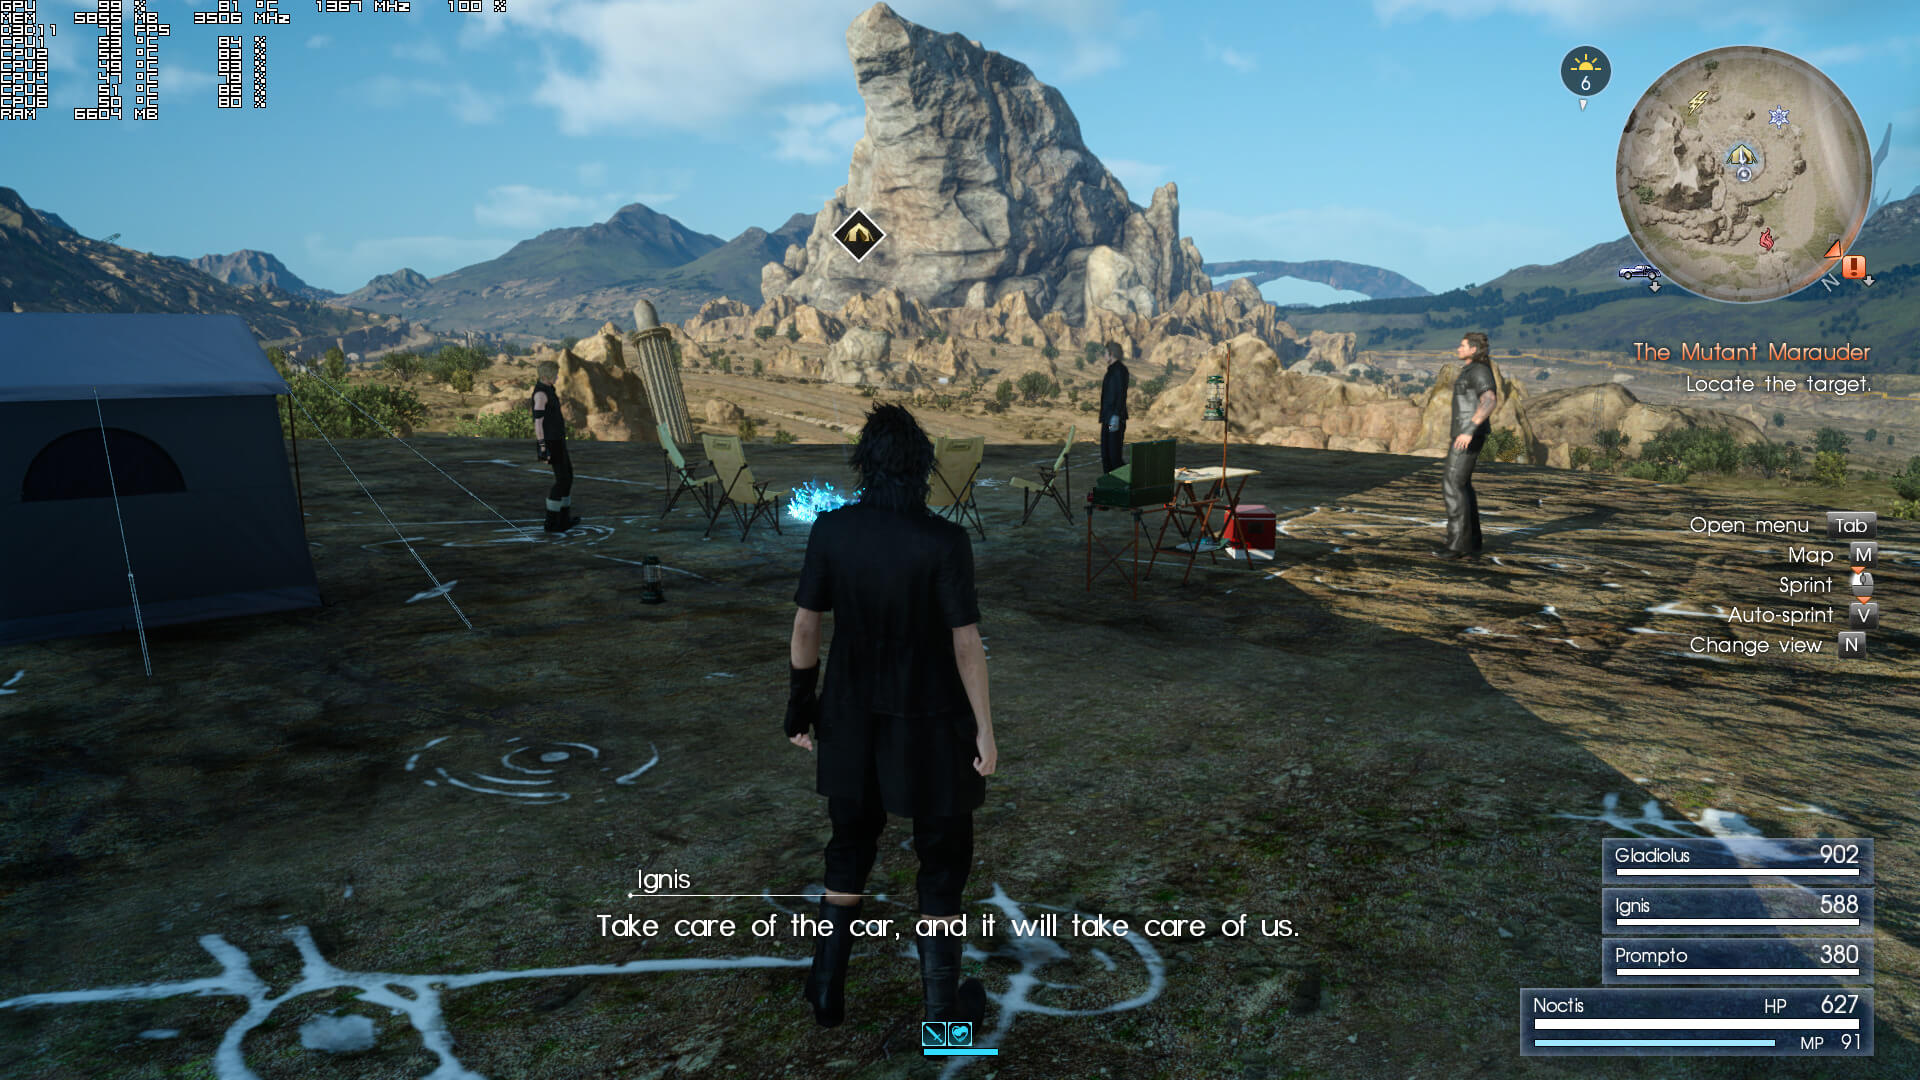 Final Fantasy XV Windows Edition Launches Early 2018 With A Slew Of  GameWorks Technologies. Watch The Debut 4K Trailer And Learn More, GeForce  News